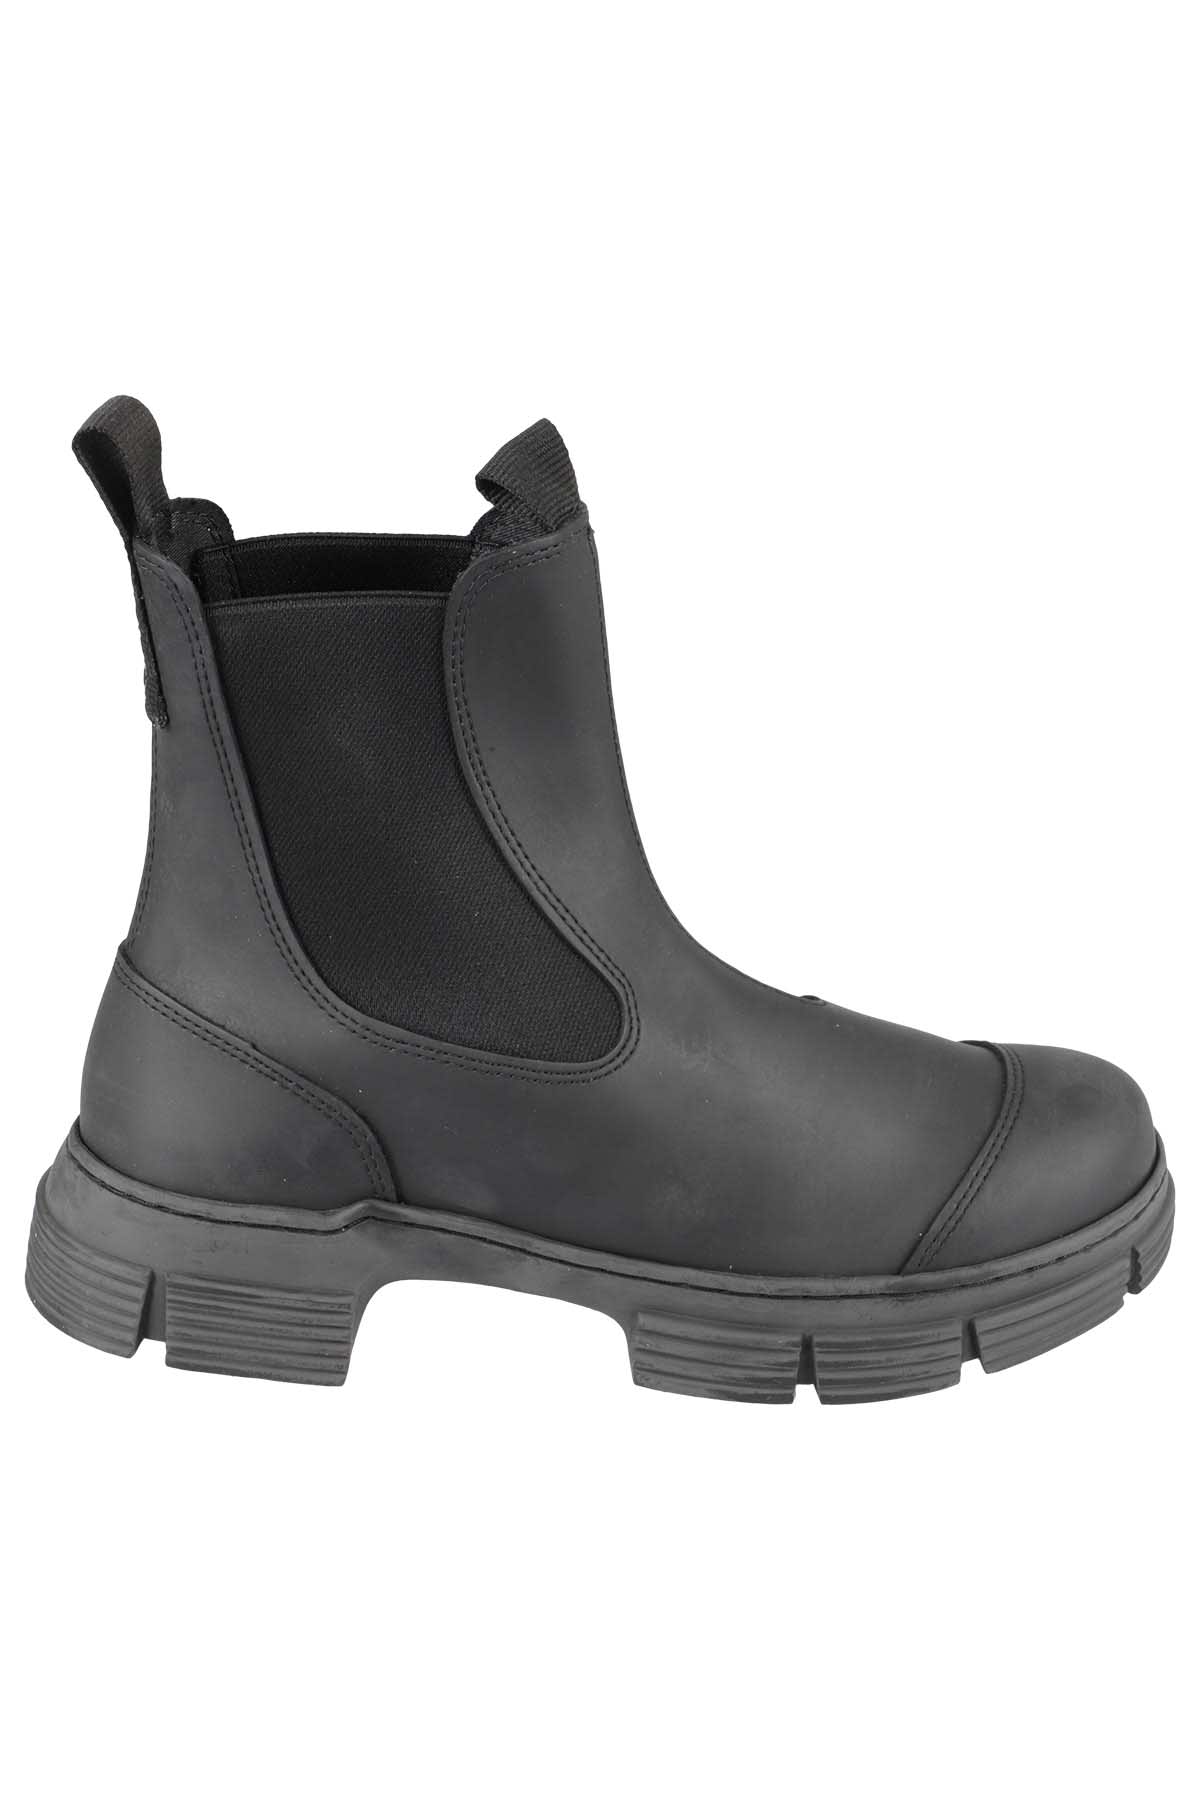 Ganni Recycled Rubber City Boot